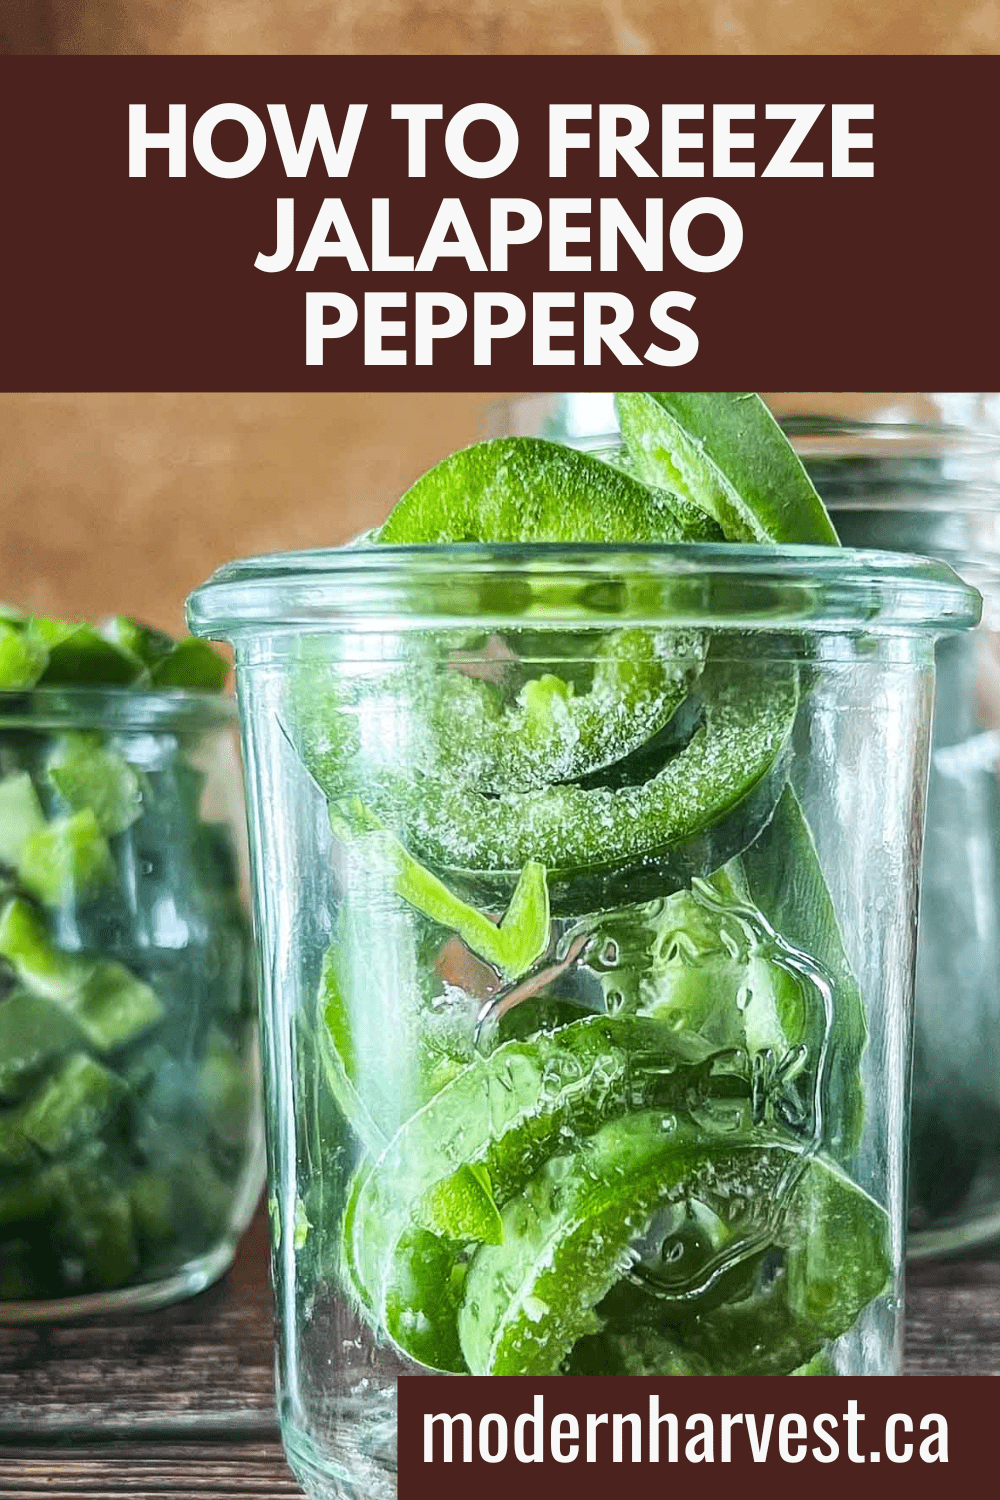 Frozen jalapenos in a glass jars with more frozen pieces scattered on a wooden surface.